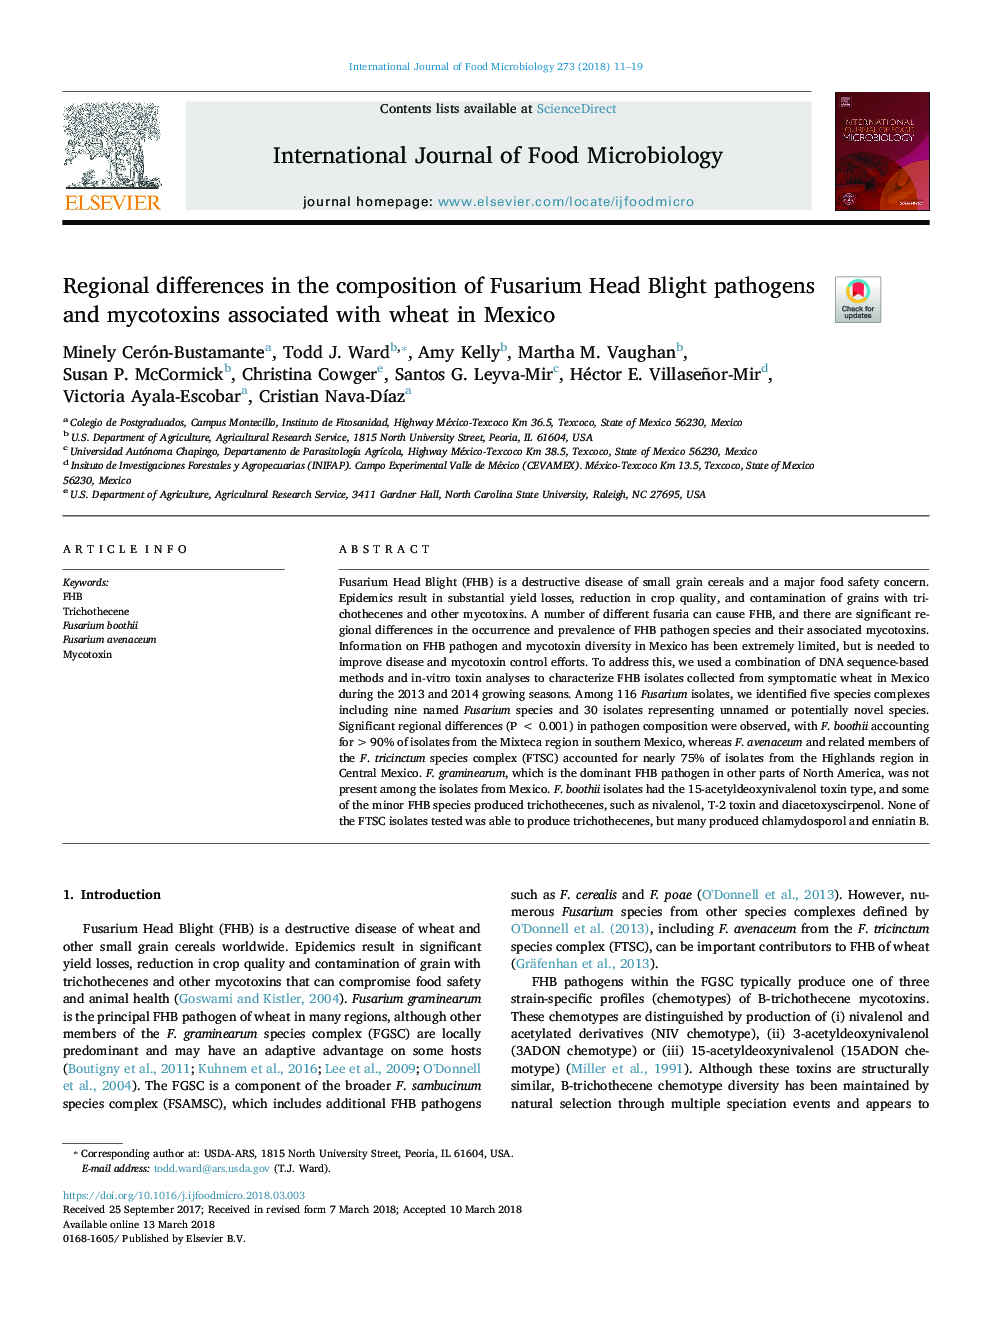 Regional differences in the composition of Fusarium Head Blight pathogens and mycotoxins associated with wheat in Mexico